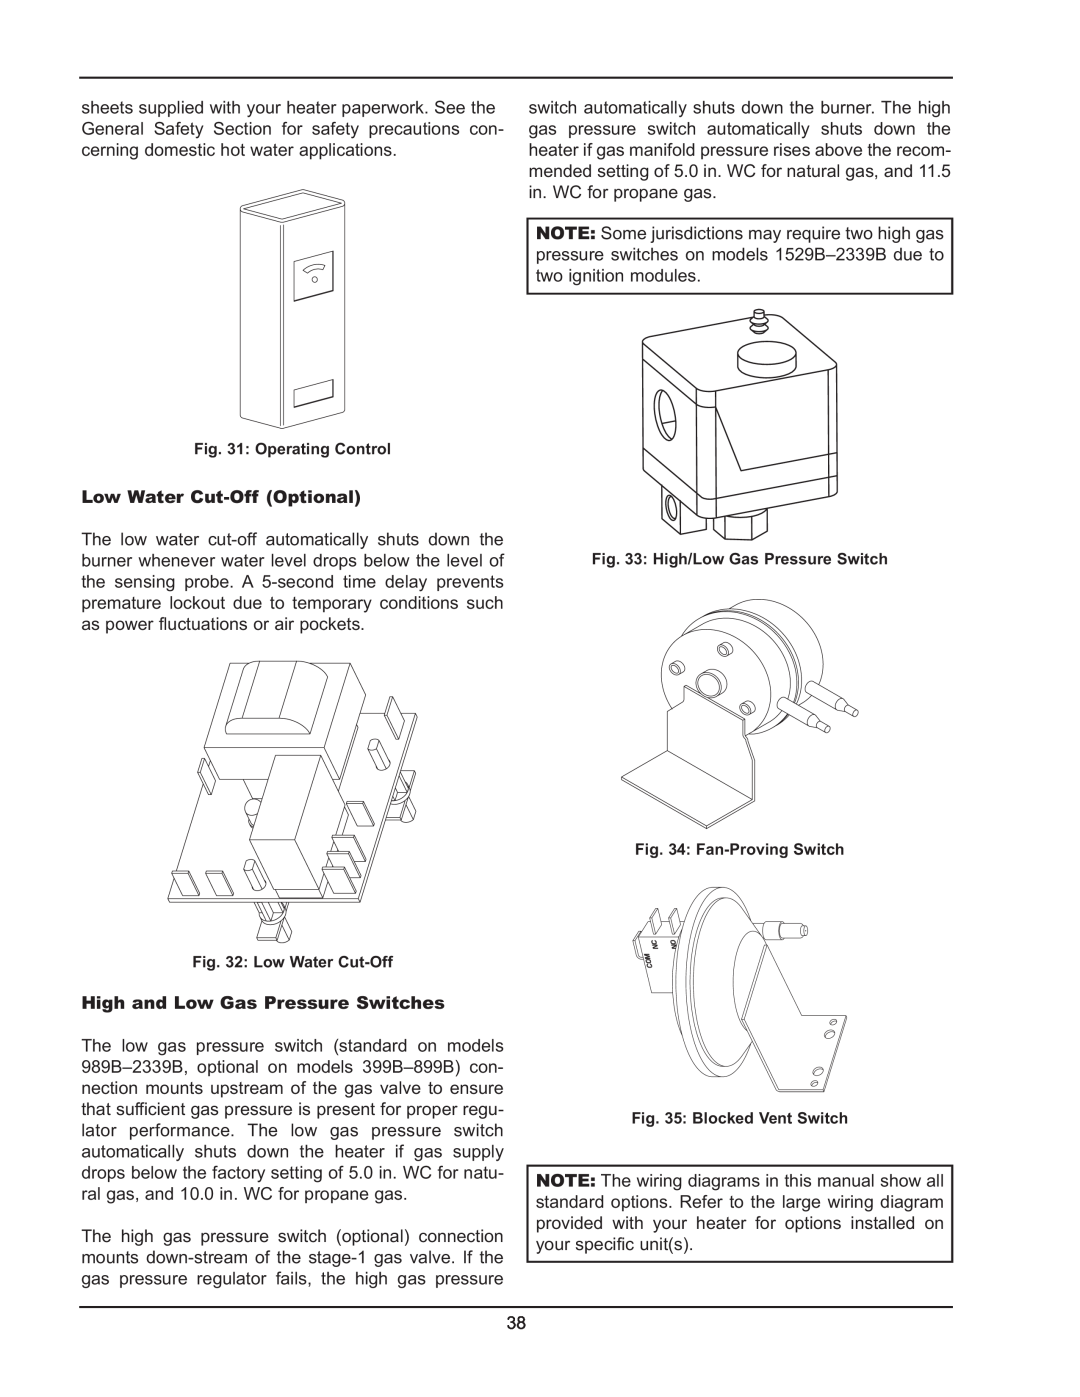 Raypak 399B-2339B operating instructions Low Water Cut-OffOptional, High and Low Gas Pressure Switches 